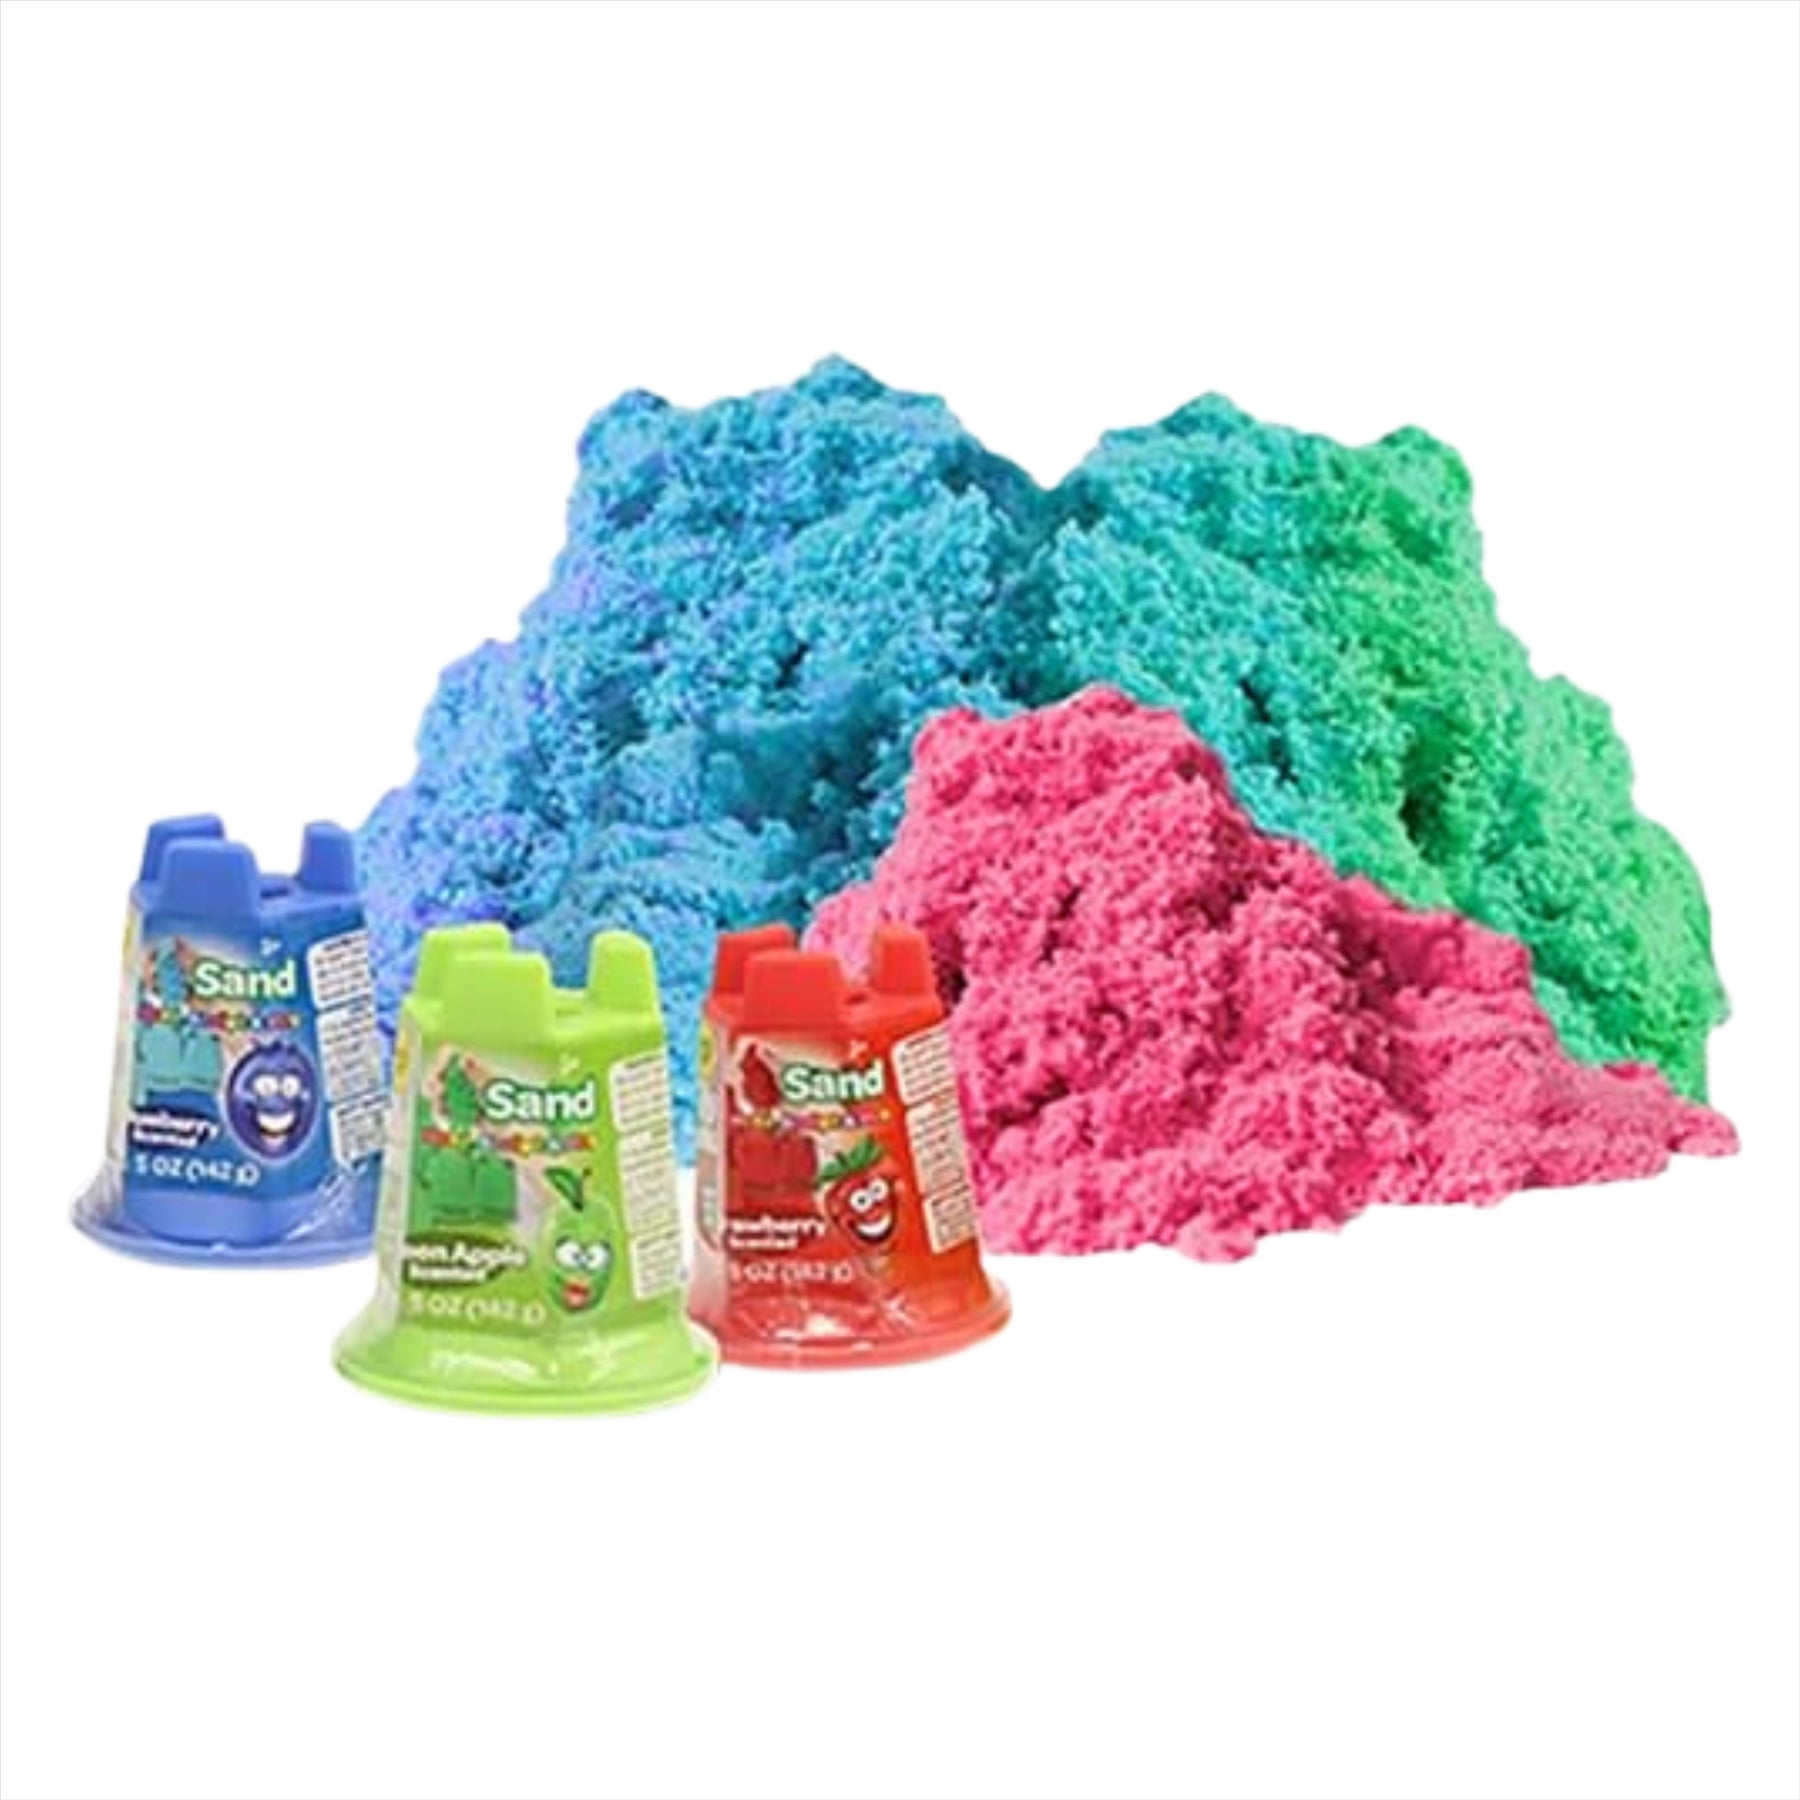 Crayola Silly Scents Unique Fruit Scented Play-Sand Pots - Pack of 3 - Toptoys2u